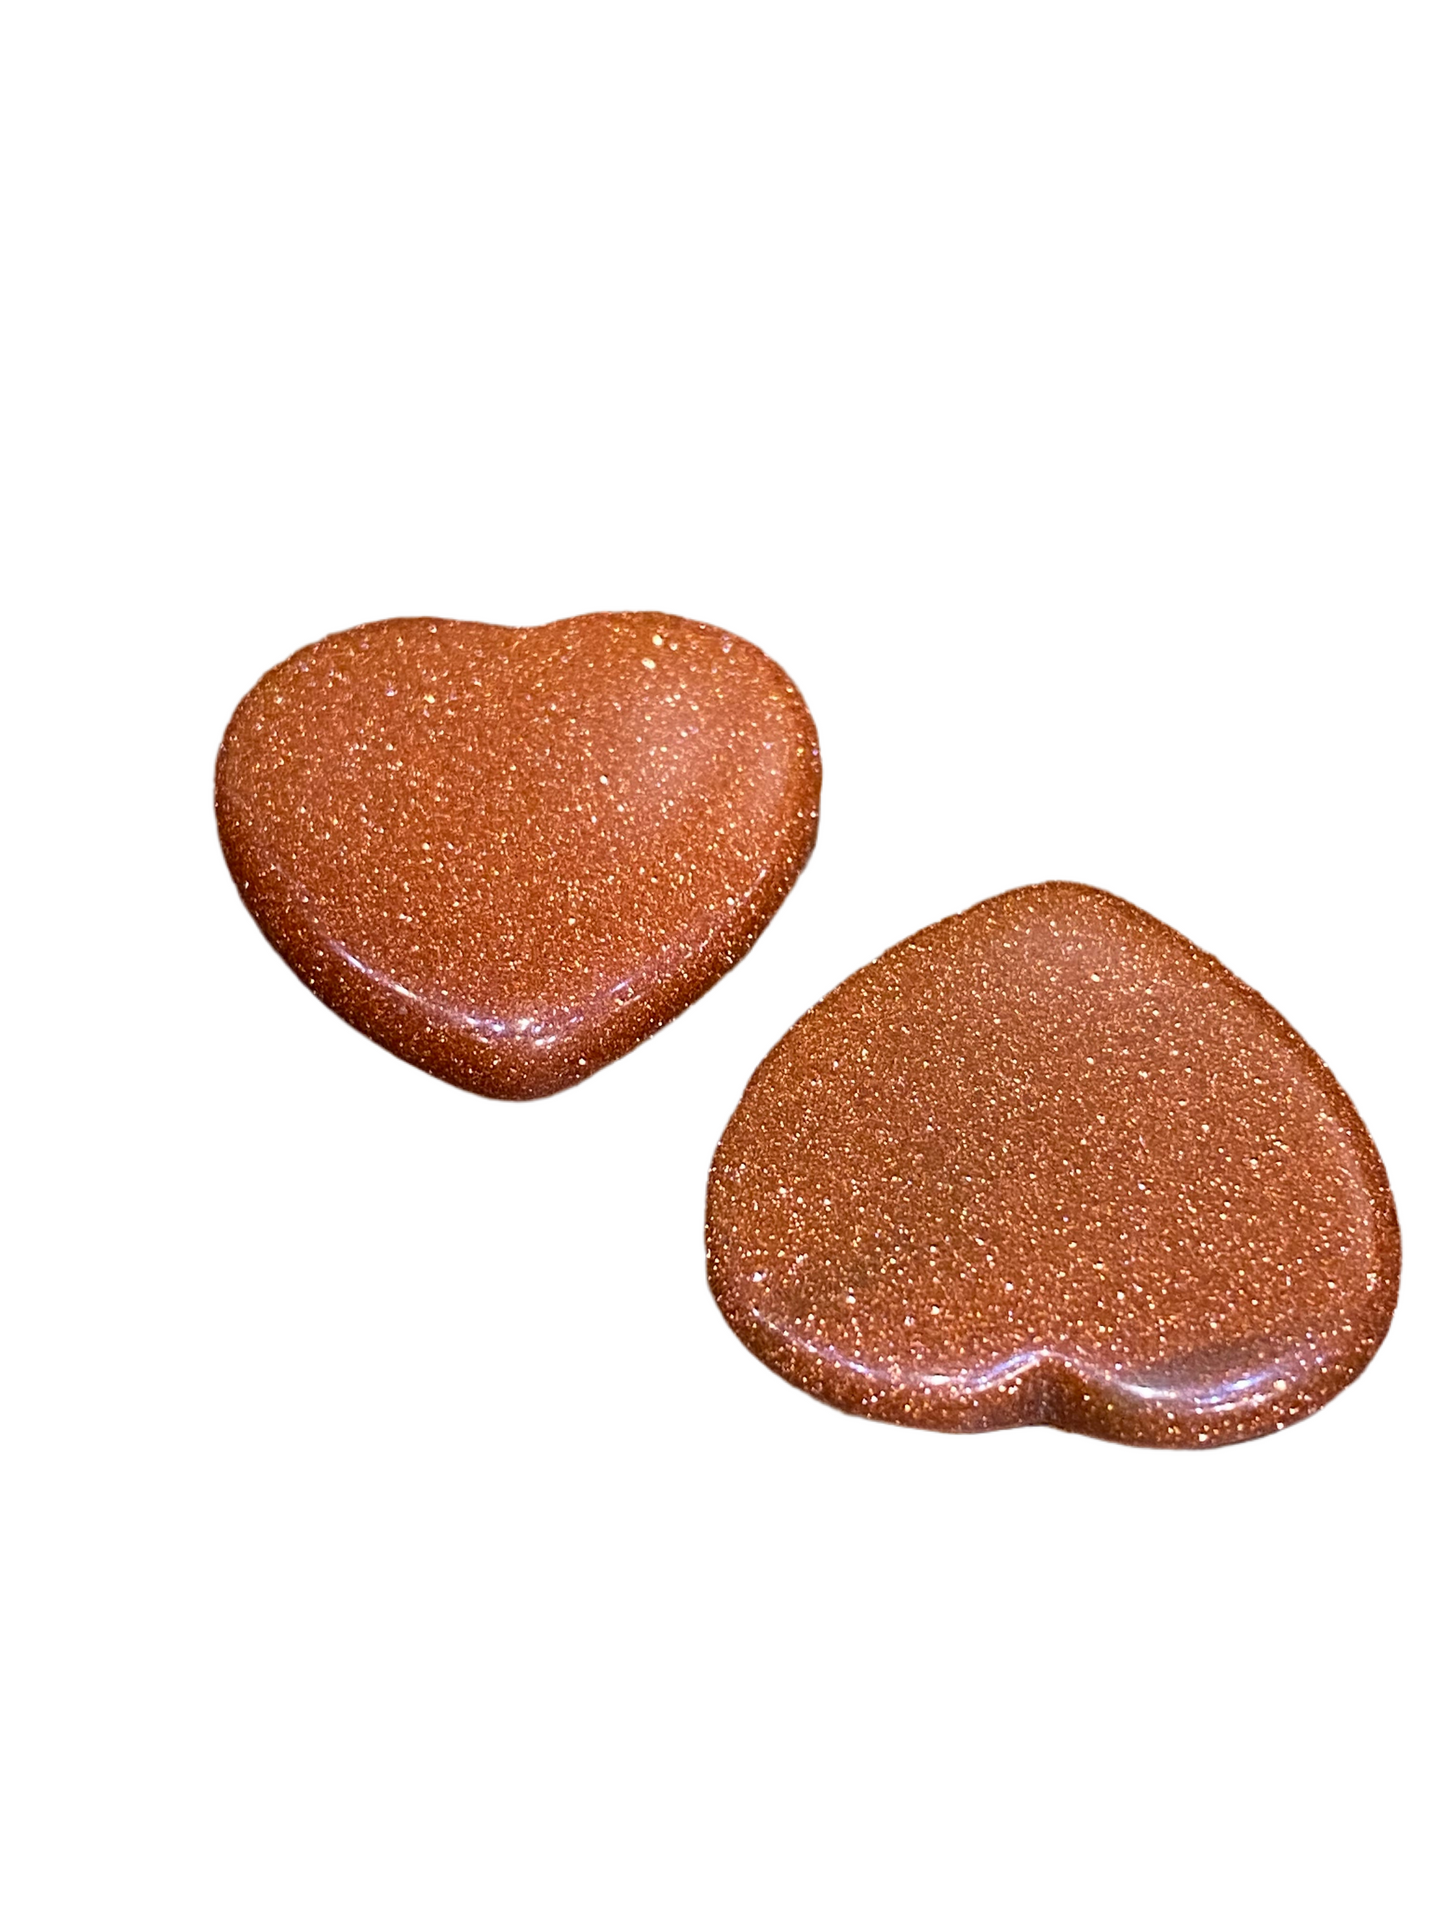 Red Goldstone Flat Tumbled Hand Carved Polished Heart 1 each